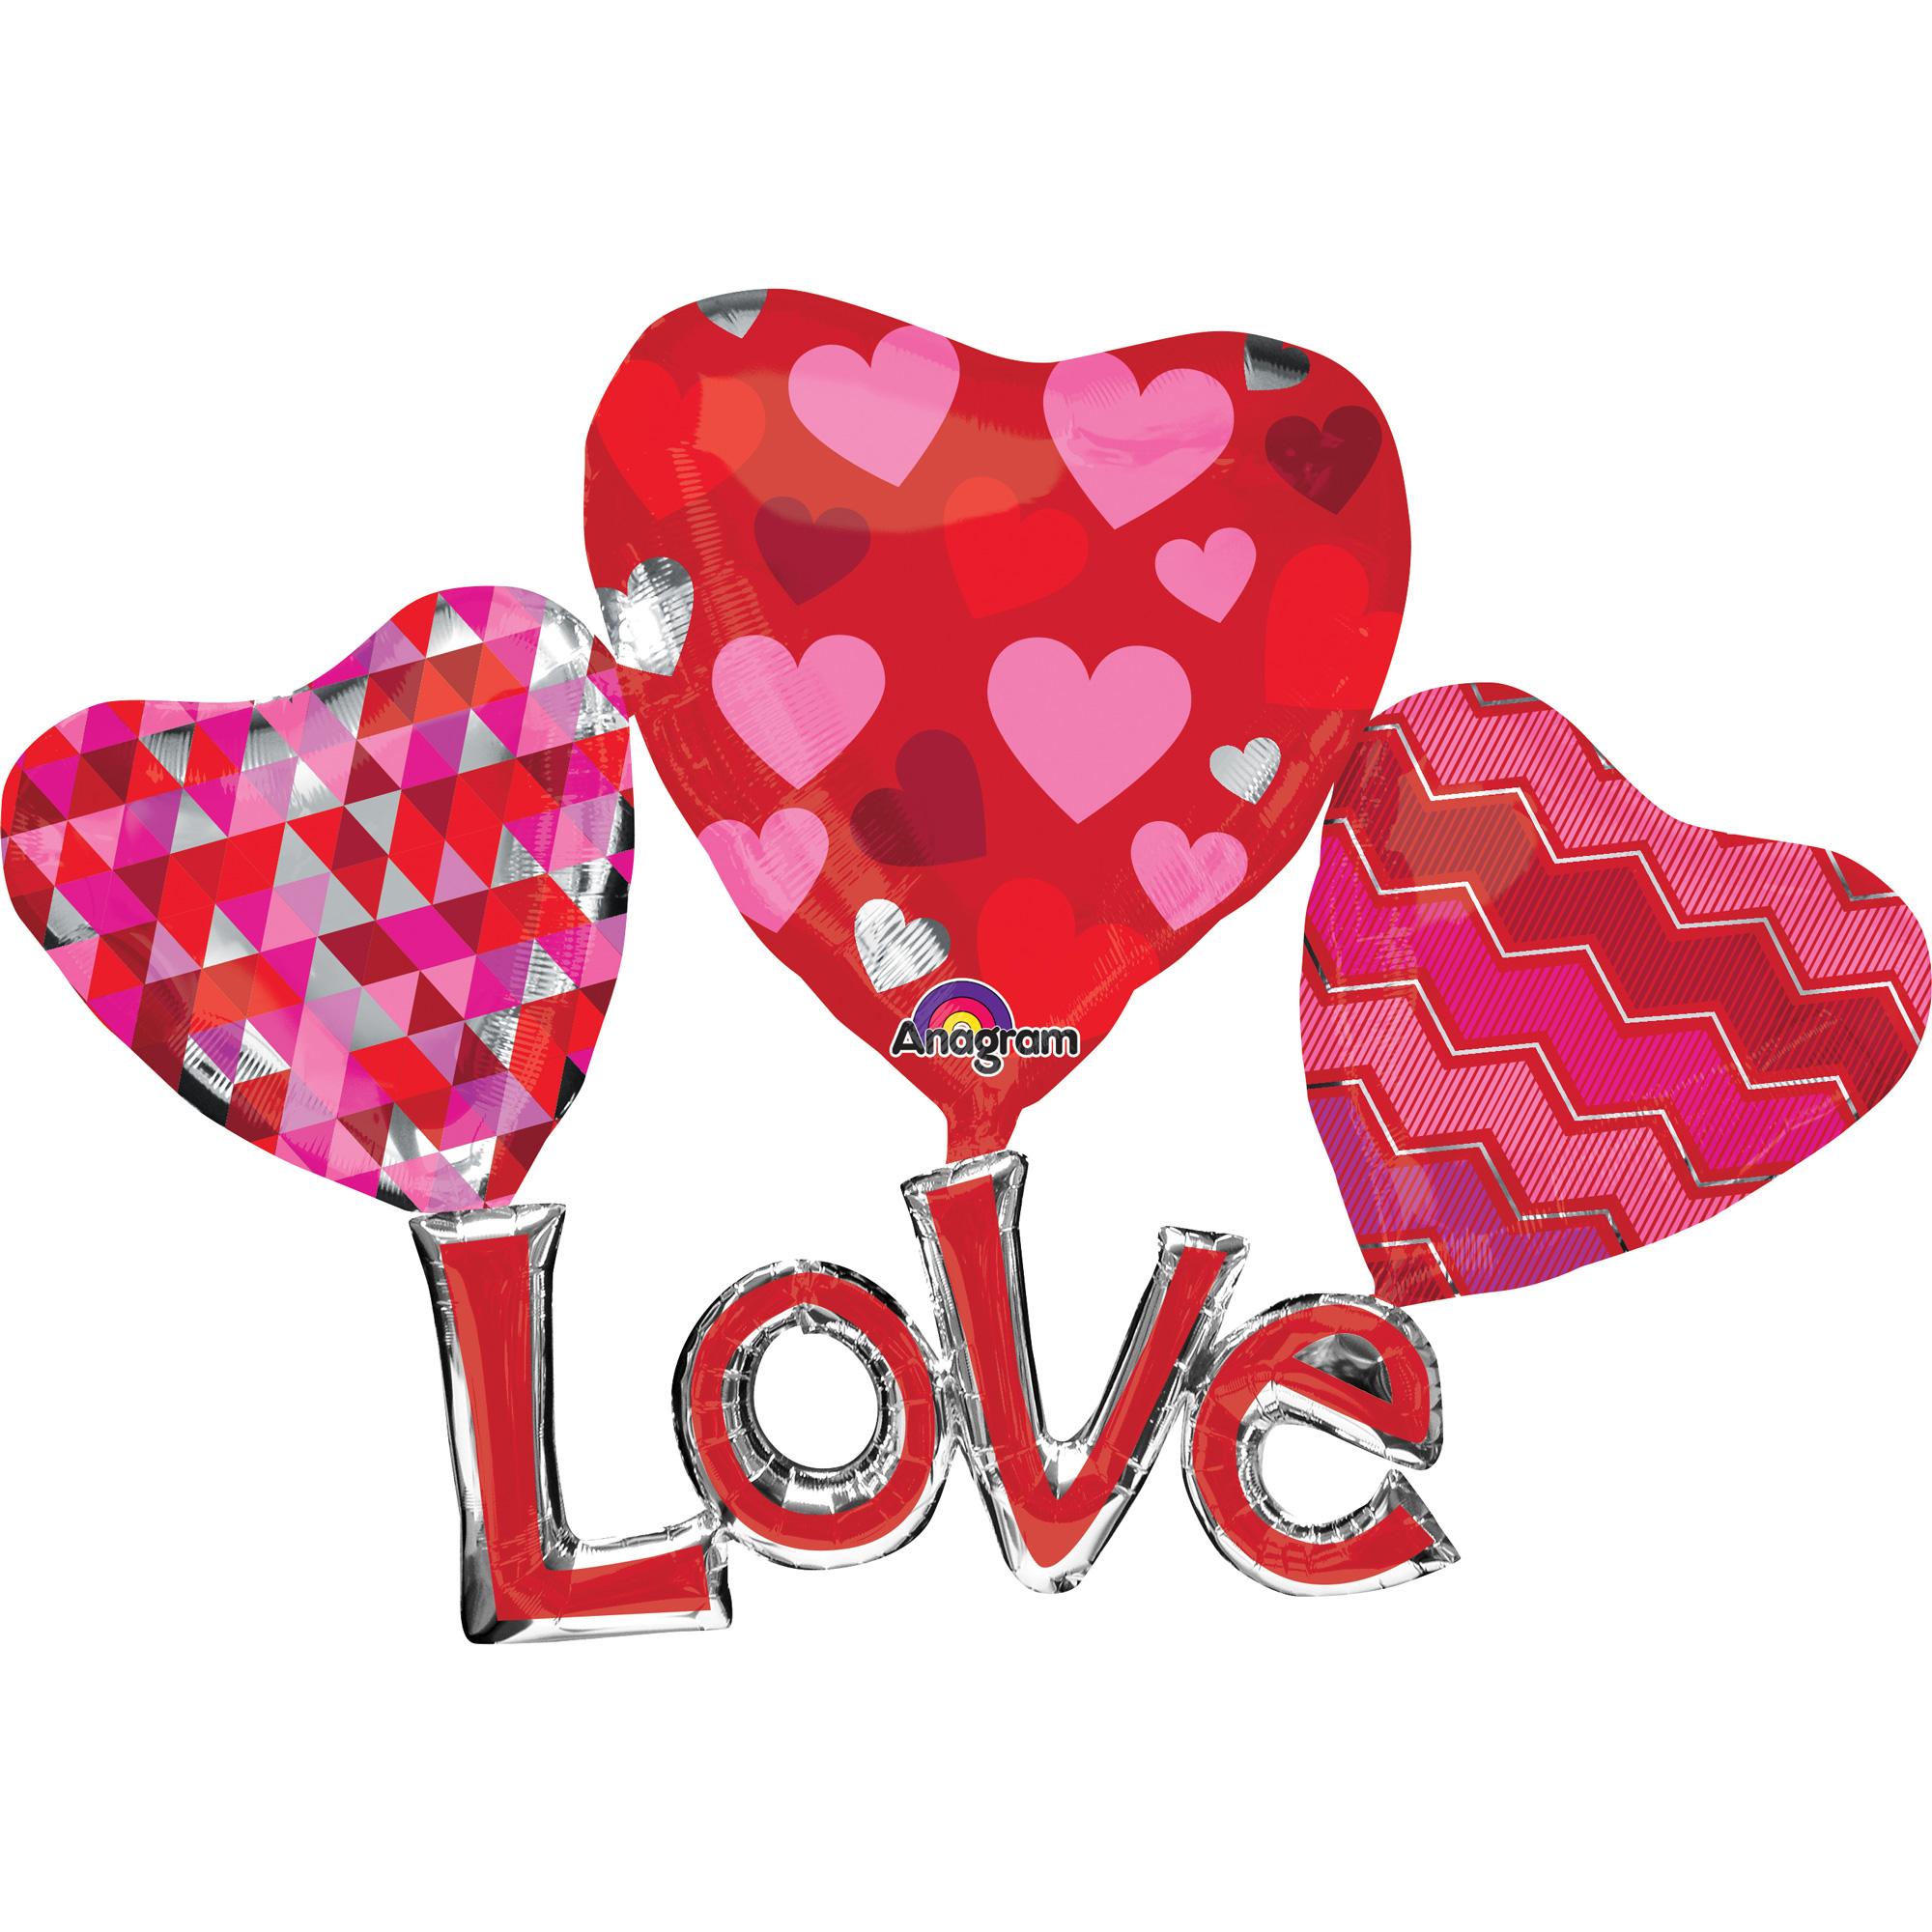 Floating Love Multi Foil Balloon 58x41in Balloons & Streamers - Party Centre